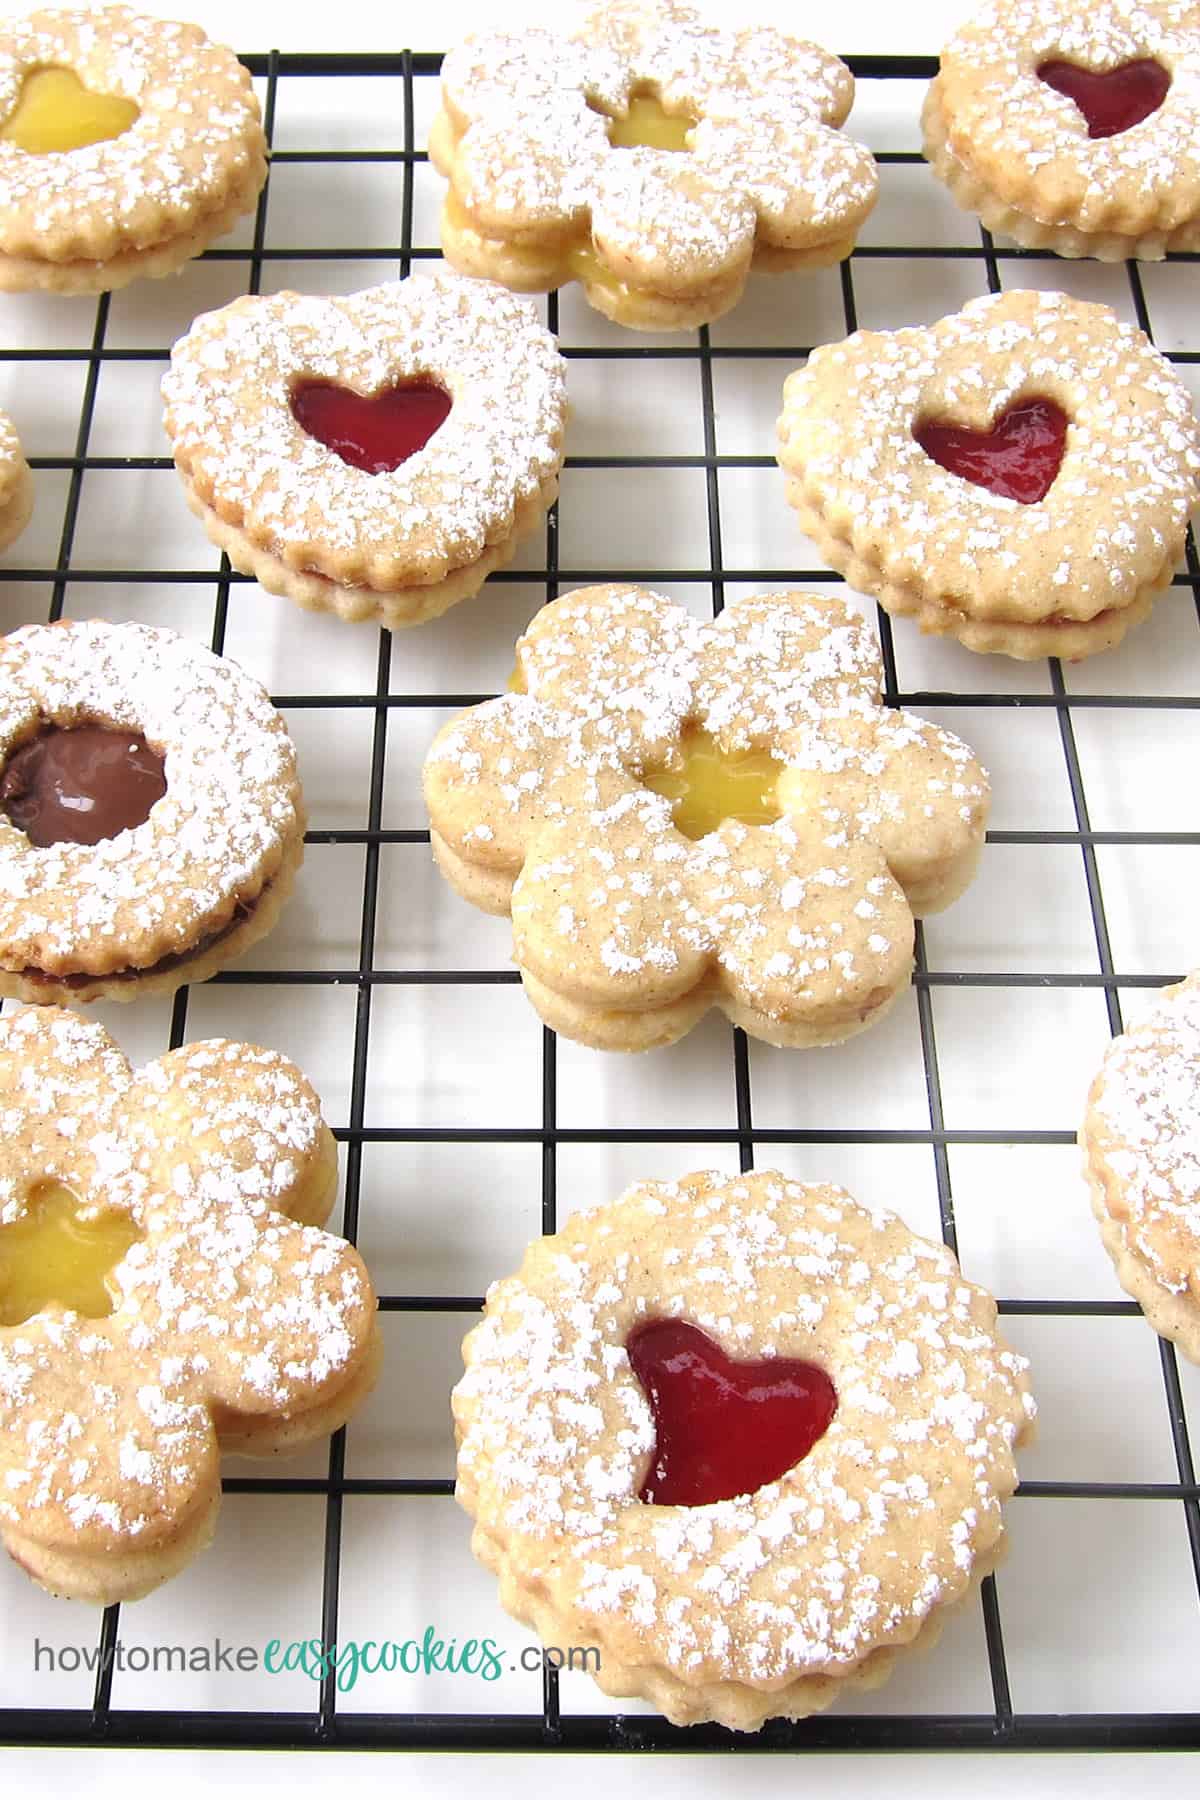 Linzer cookies filled with lemon curd, raspberry preserves, and Nutella.